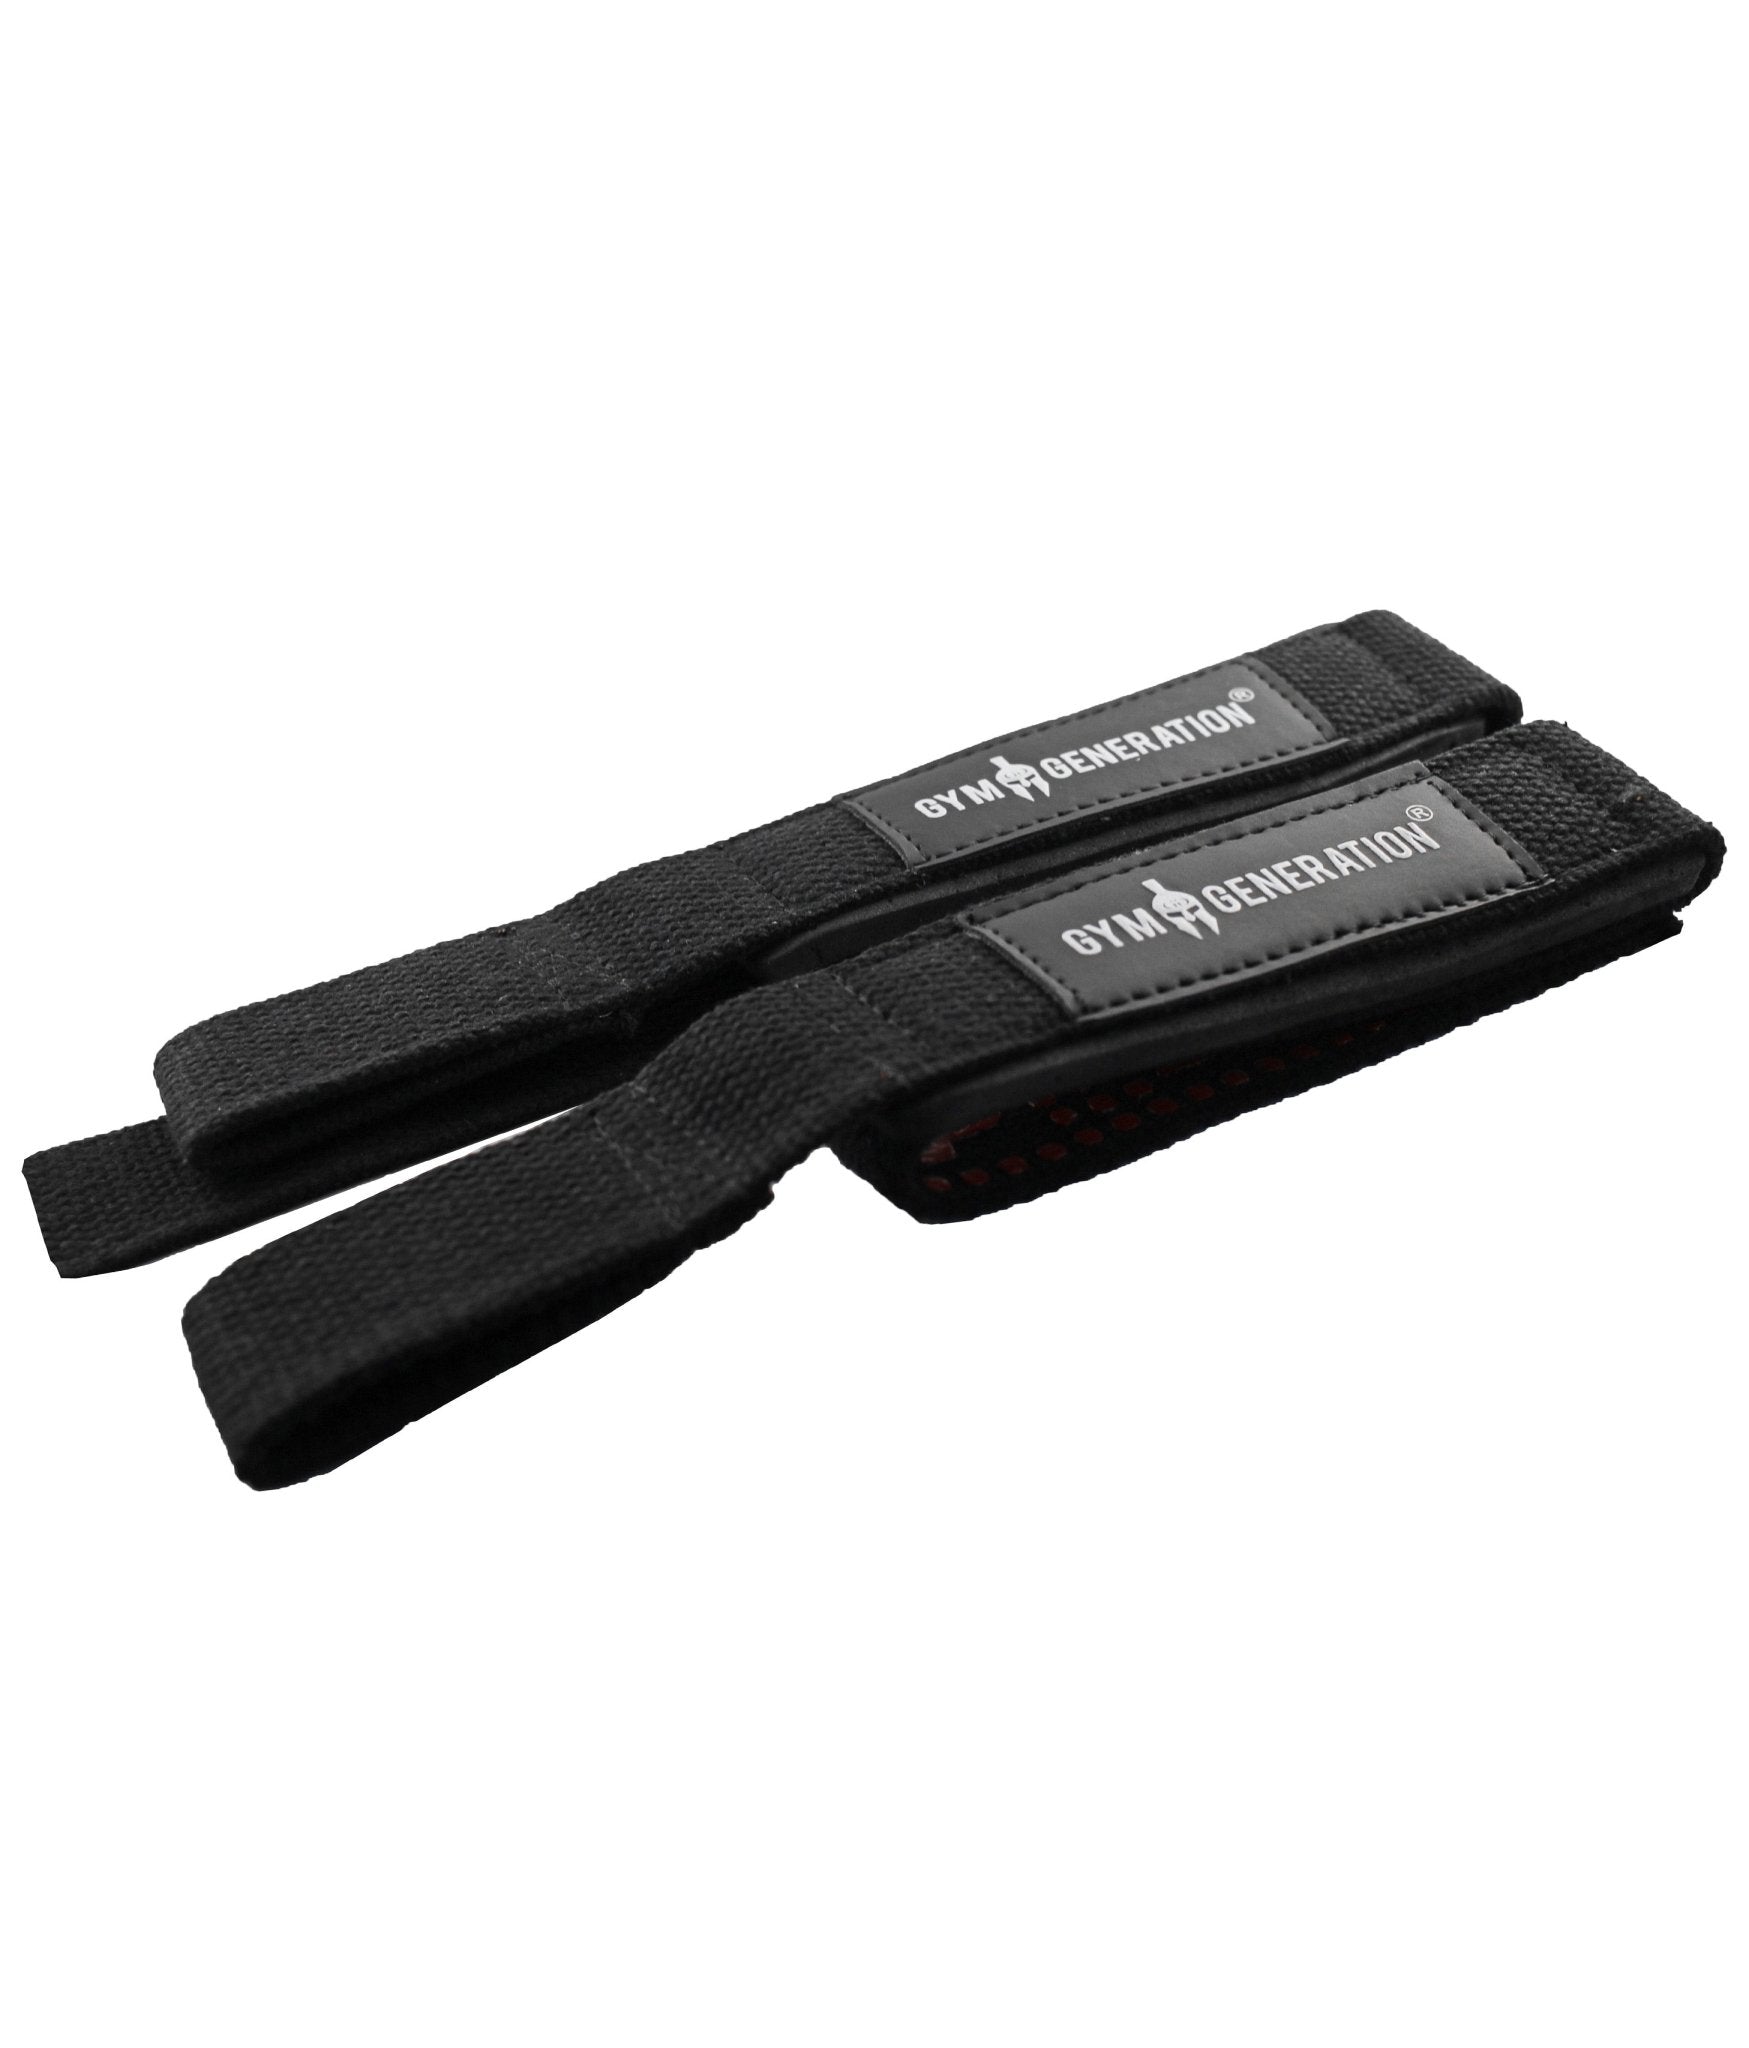 Weightlifting Straps with Extra Grip for Strength Training – Gym Generation®